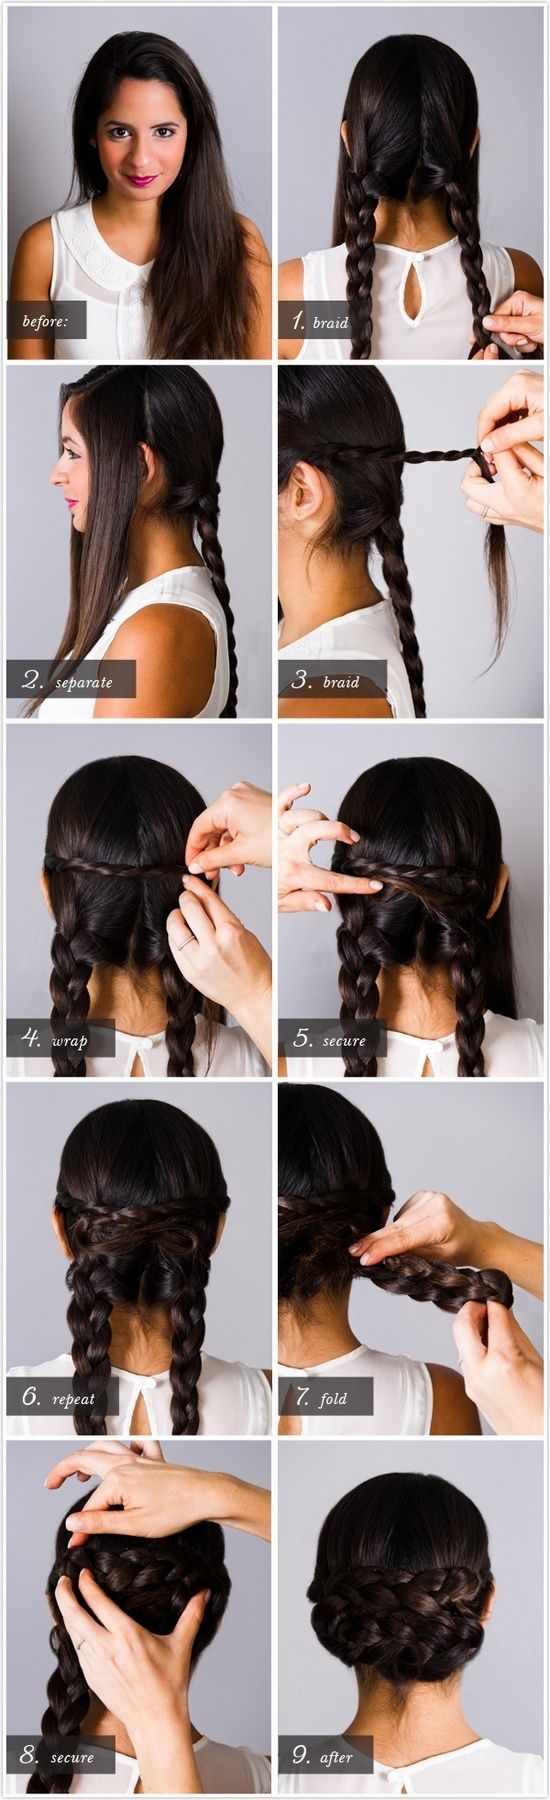 Great tutorials for gorgeous hairstyles